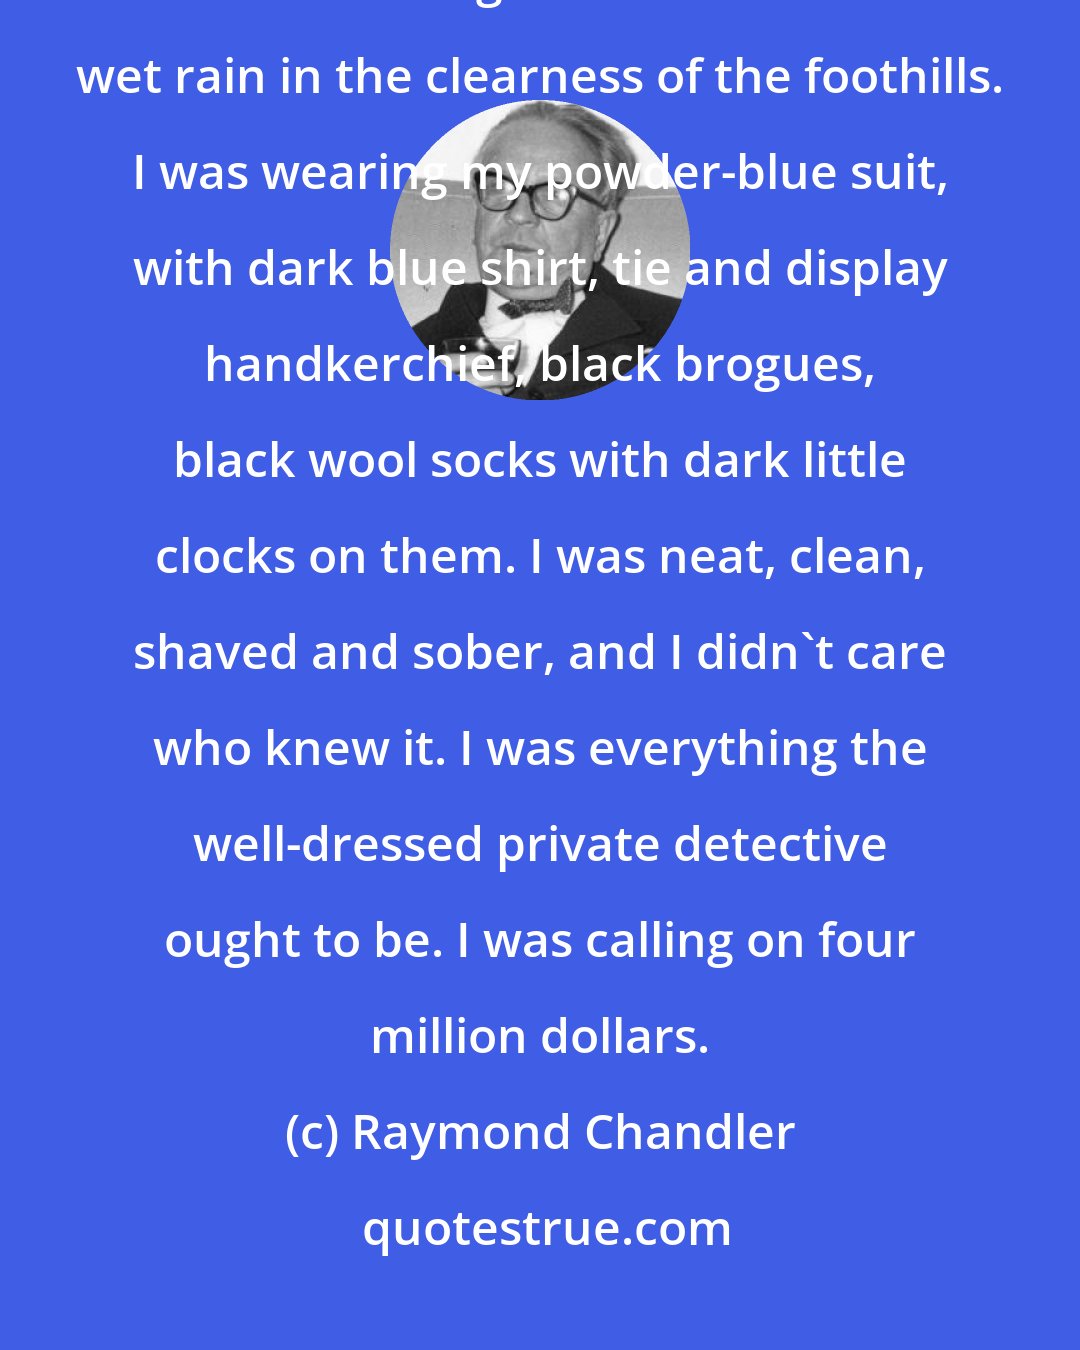 Raymond Chandler: It was about eleven o'clock in the morning, mid October, with the sun not shining and a look of hard wet rain in the clearness of the foothills. I was wearing my powder-blue suit, with dark blue shirt, tie and display handkerchief, black brogues, black wool socks with dark little clocks on them. I was neat, clean, shaved and sober, and I didn't care who knew it. I was everything the well-dressed private detective ought to be. I was calling on four million dollars.